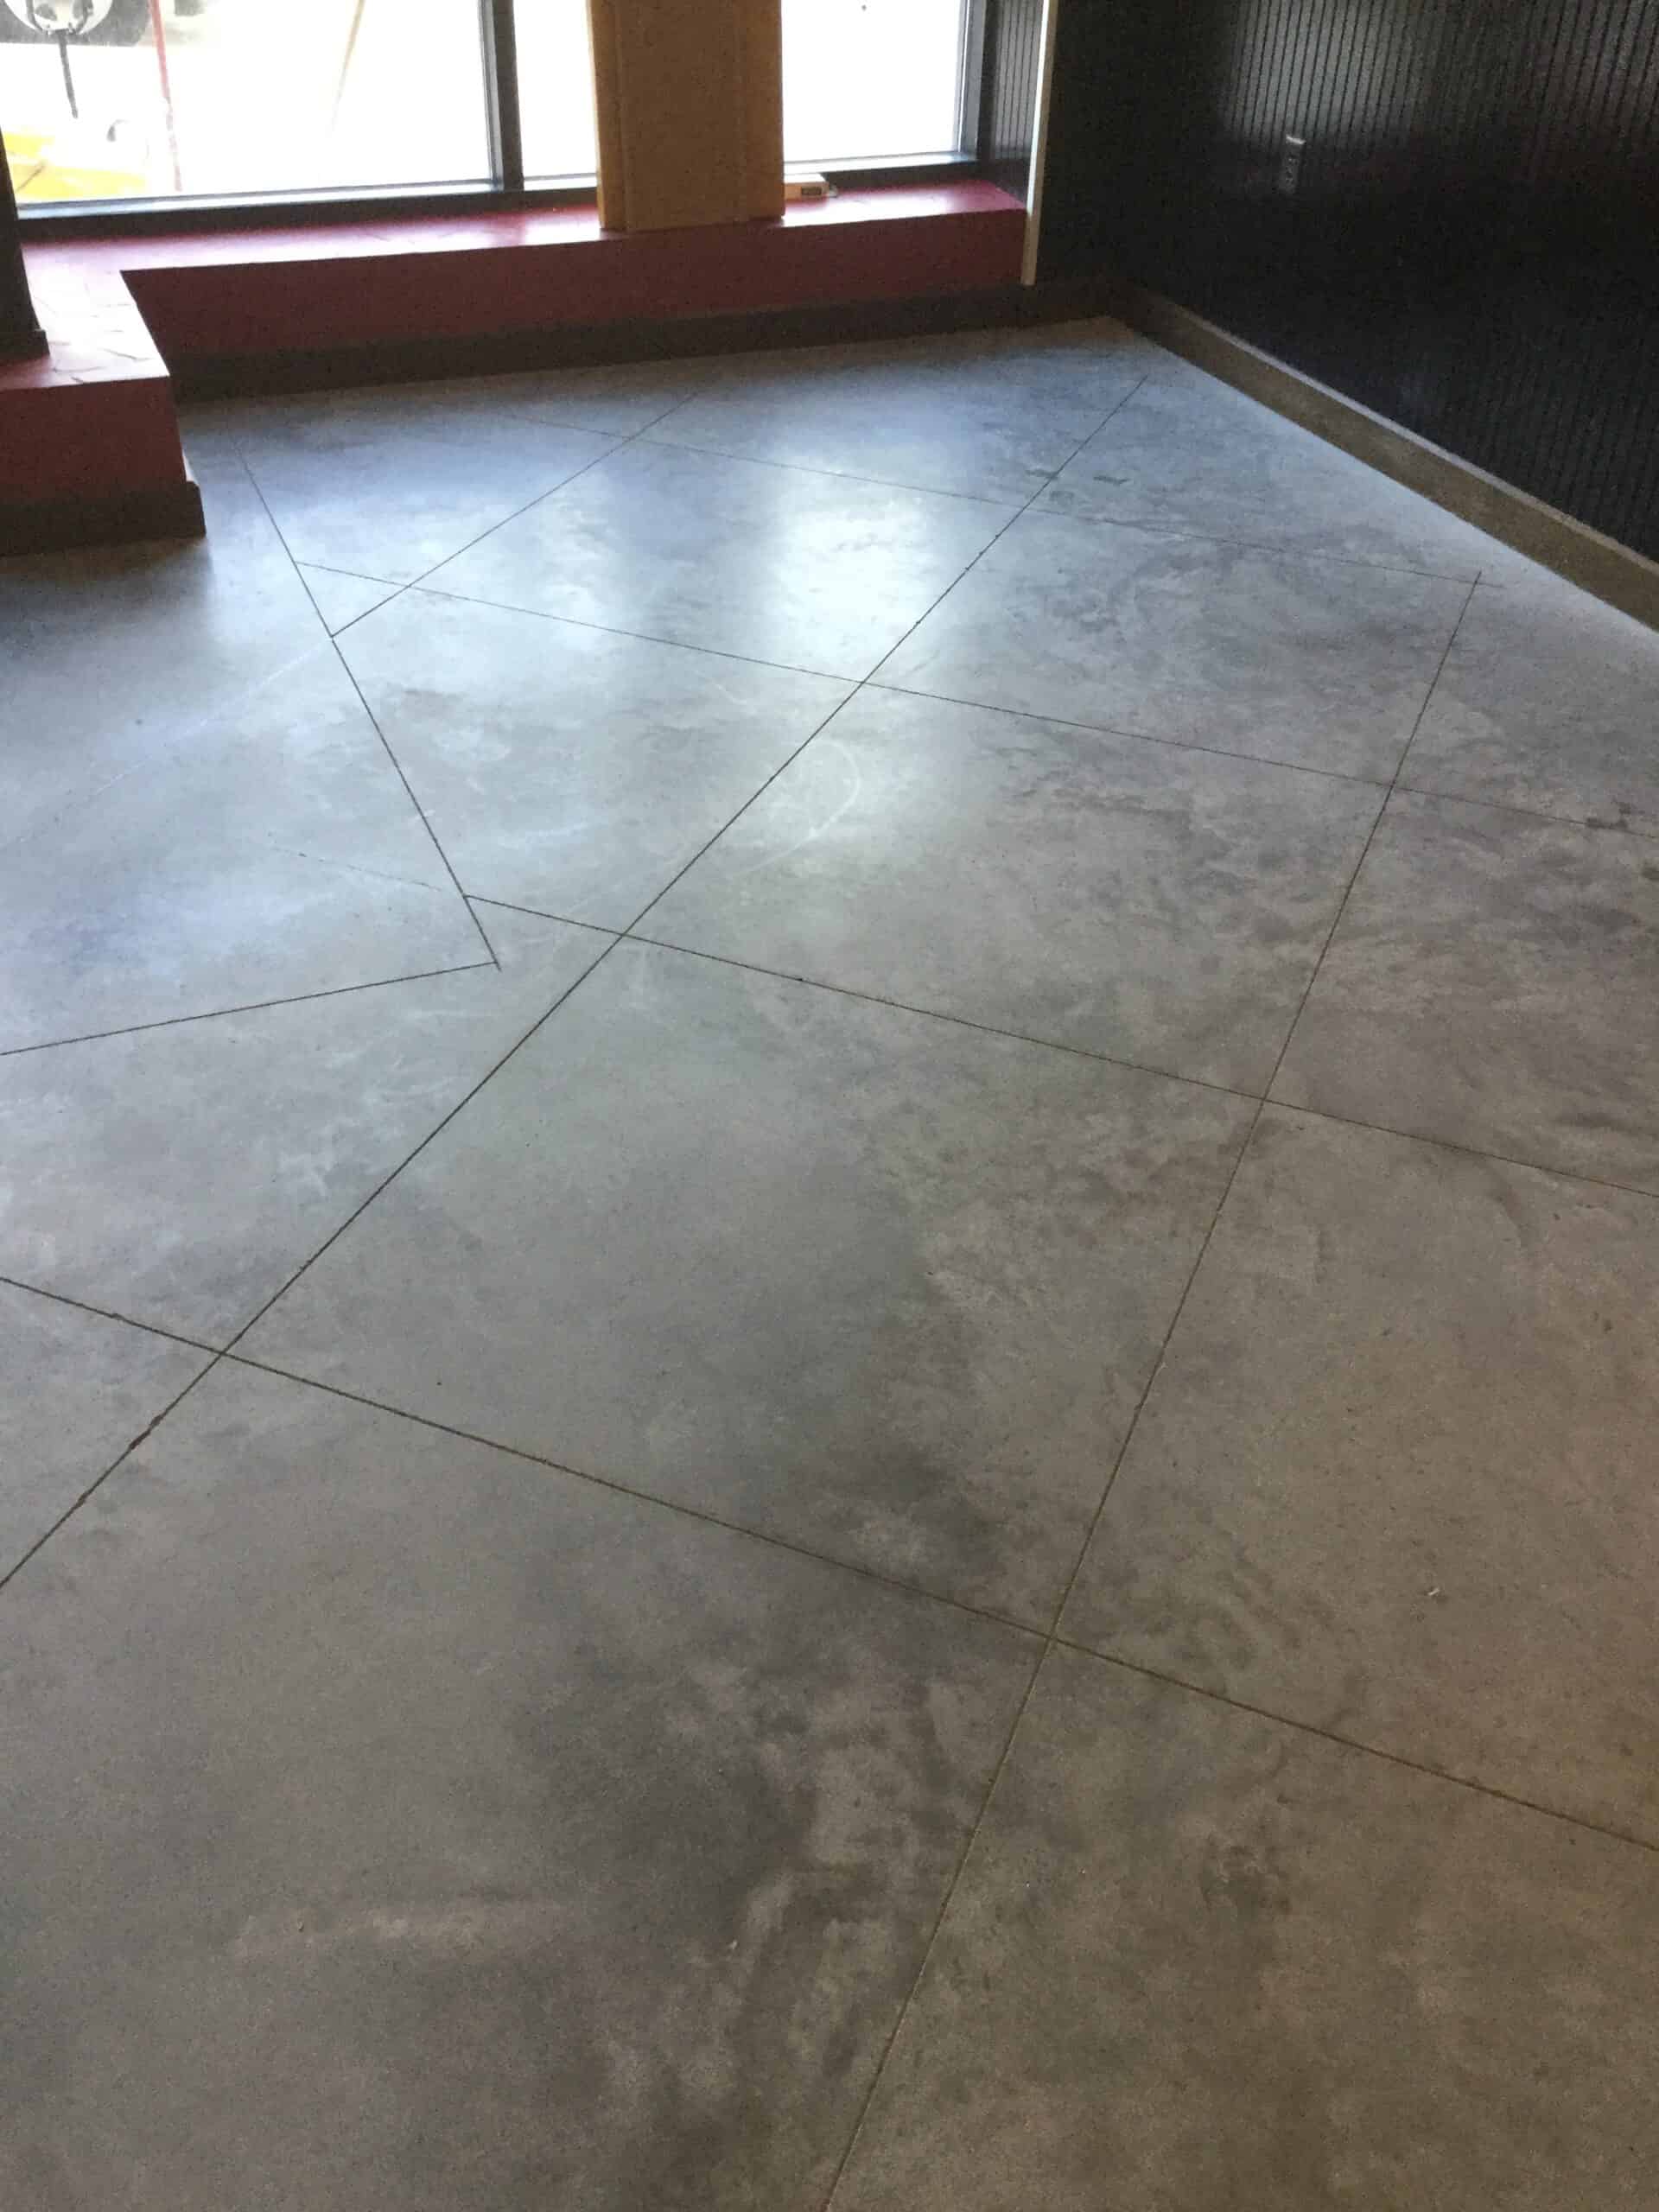 Concrete flooring that is easy to clean